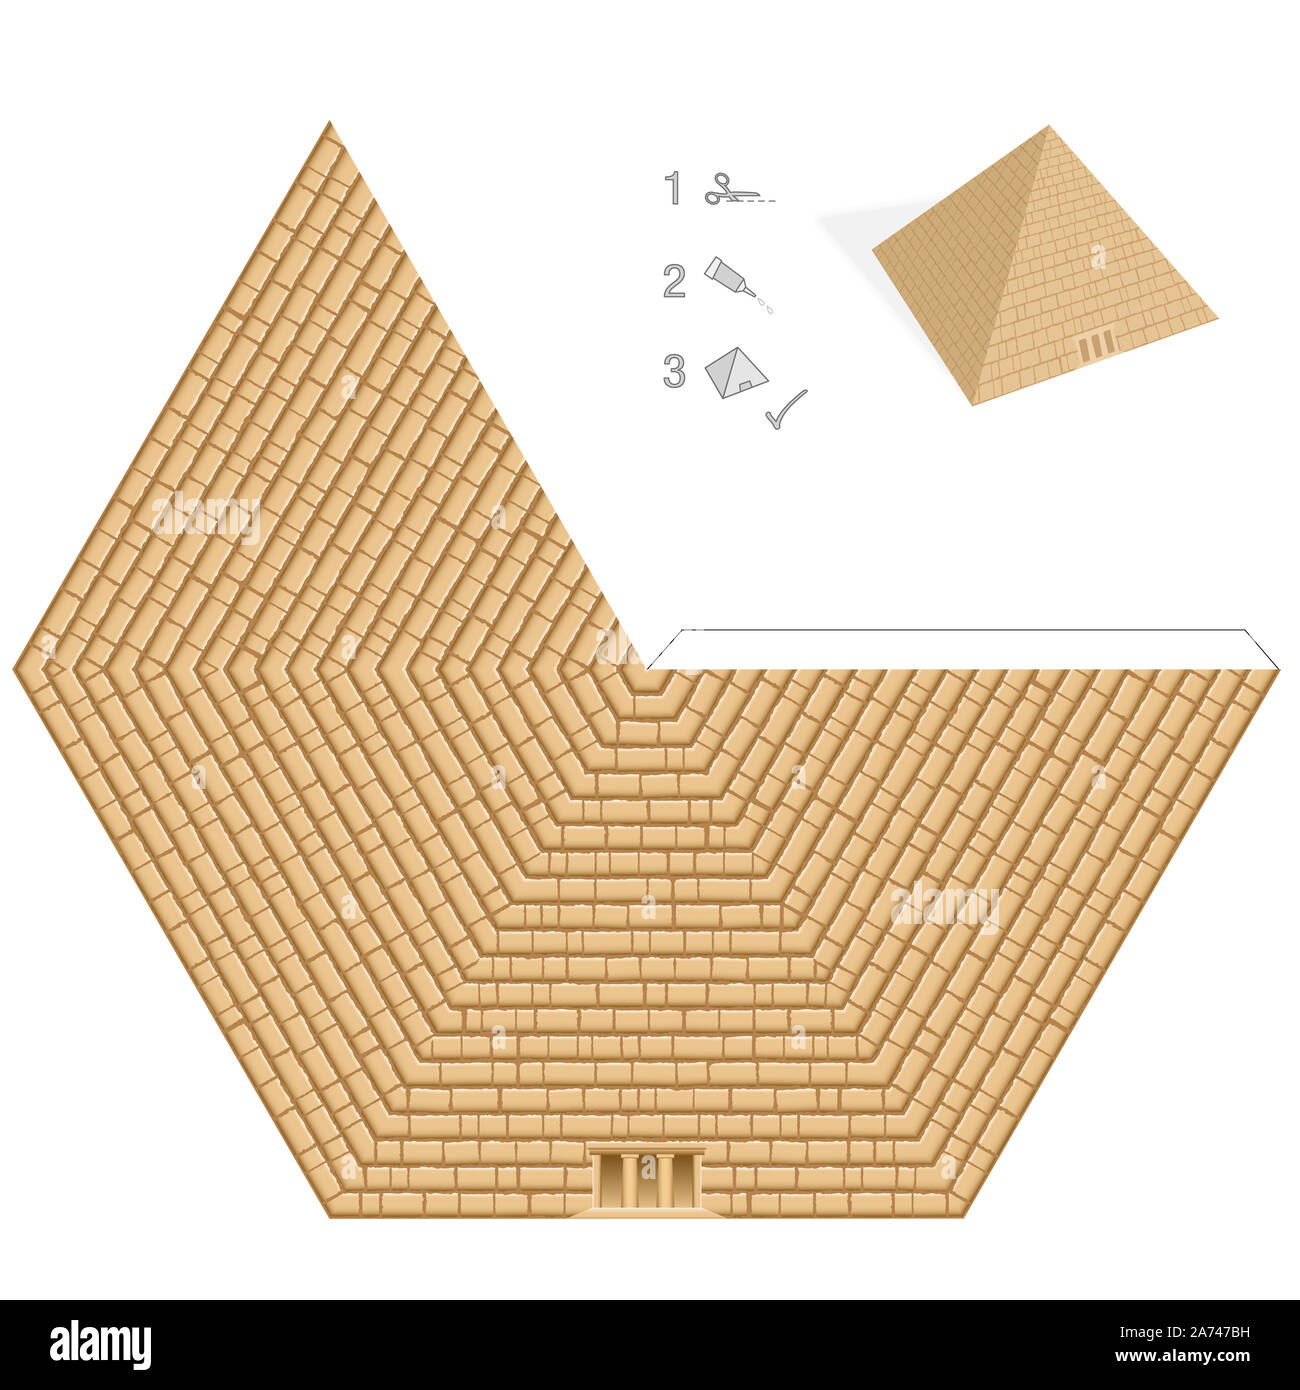 Pyramid paper model. Easy template - historical, egyptian 3D paper art - cut out, fold and glue it - illustration on white background. Stock Photo